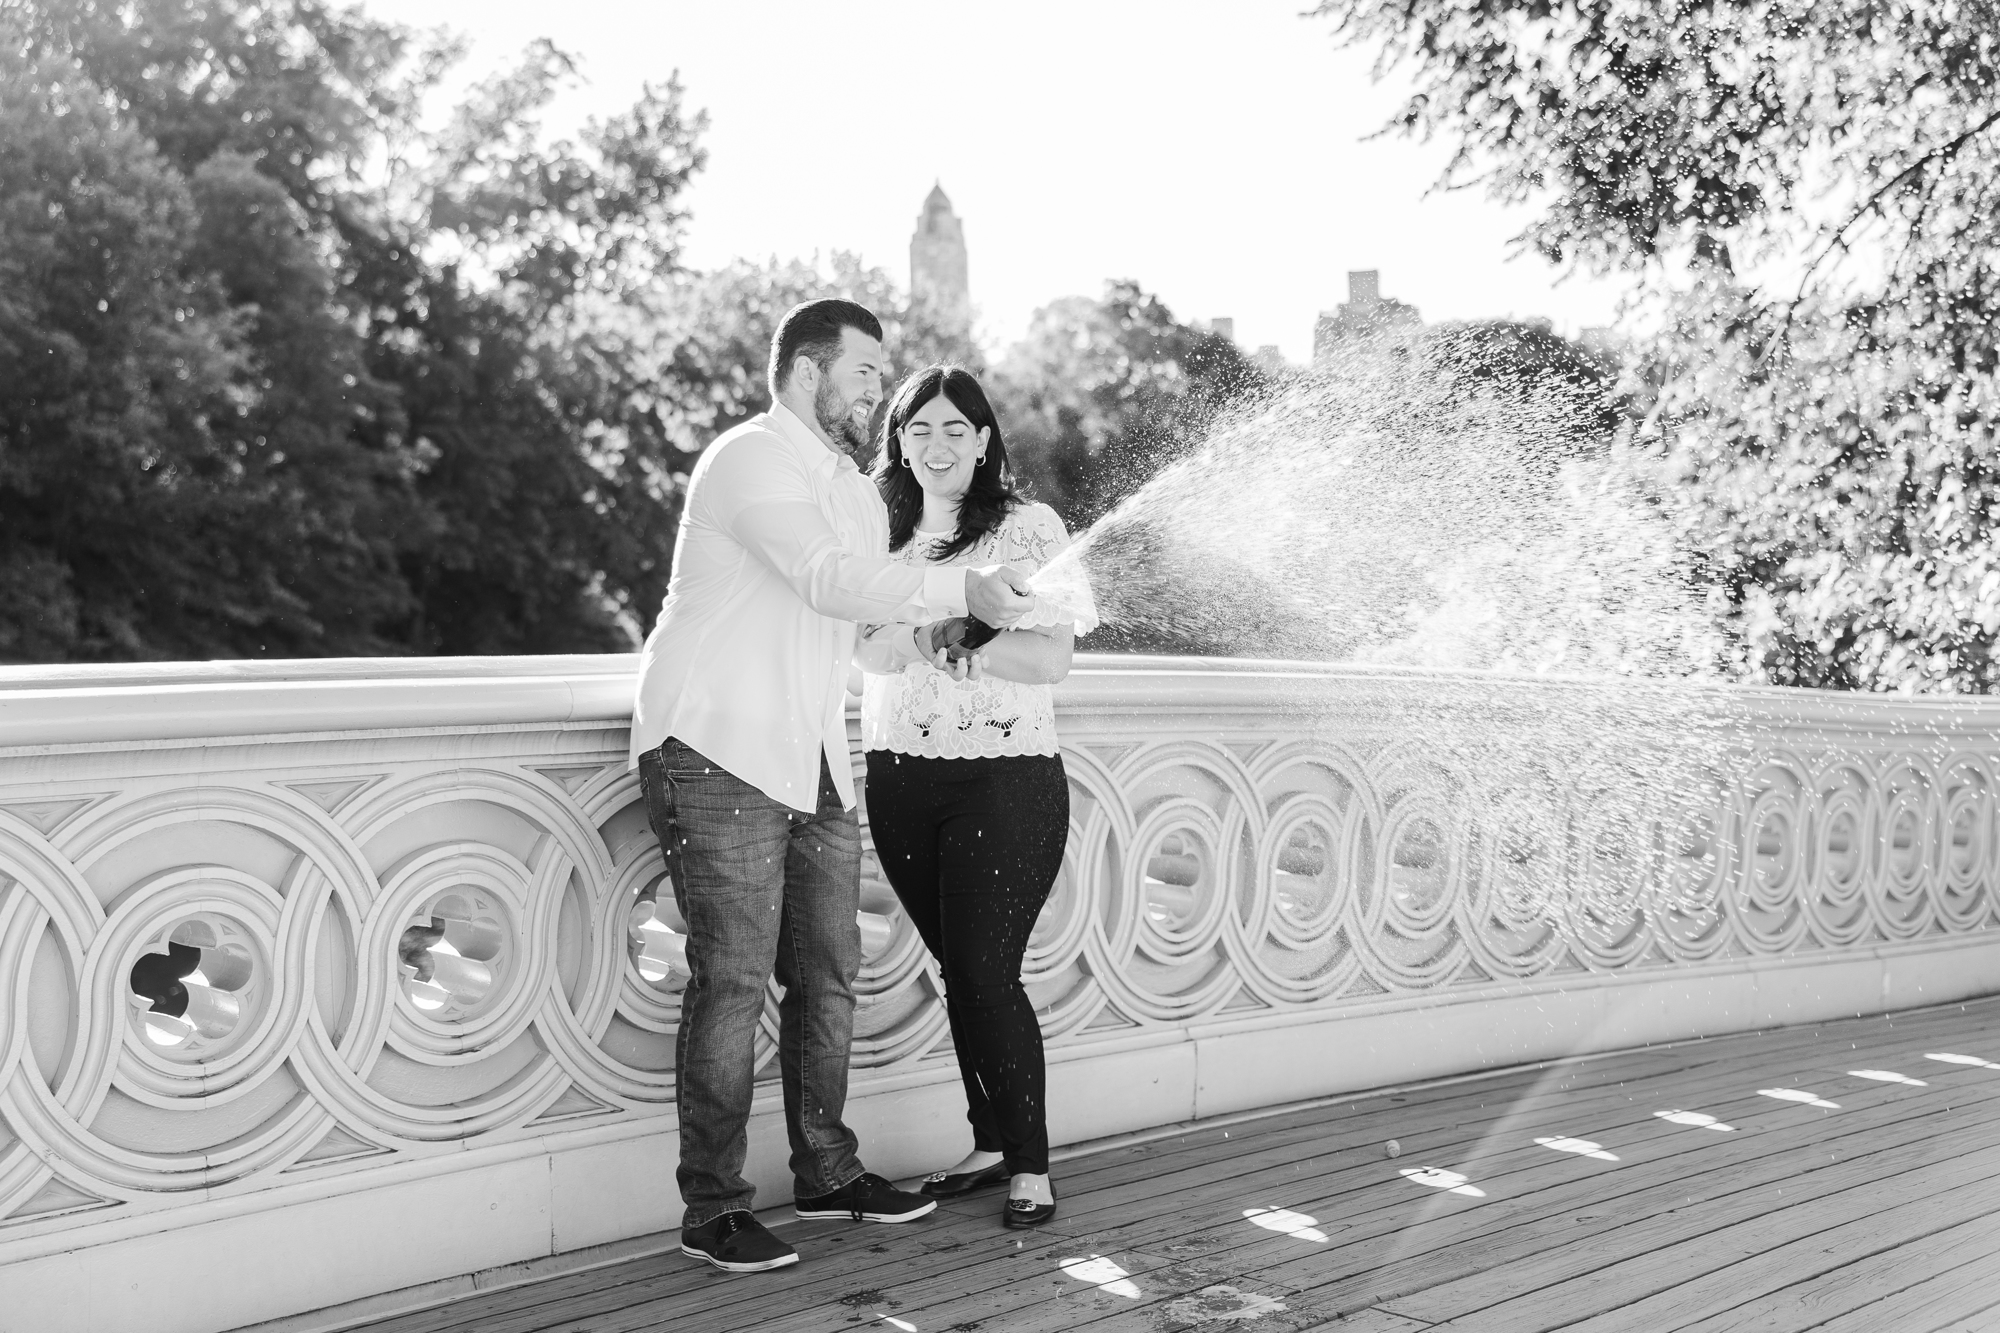 Fun Central Park Engagement Photos in New York